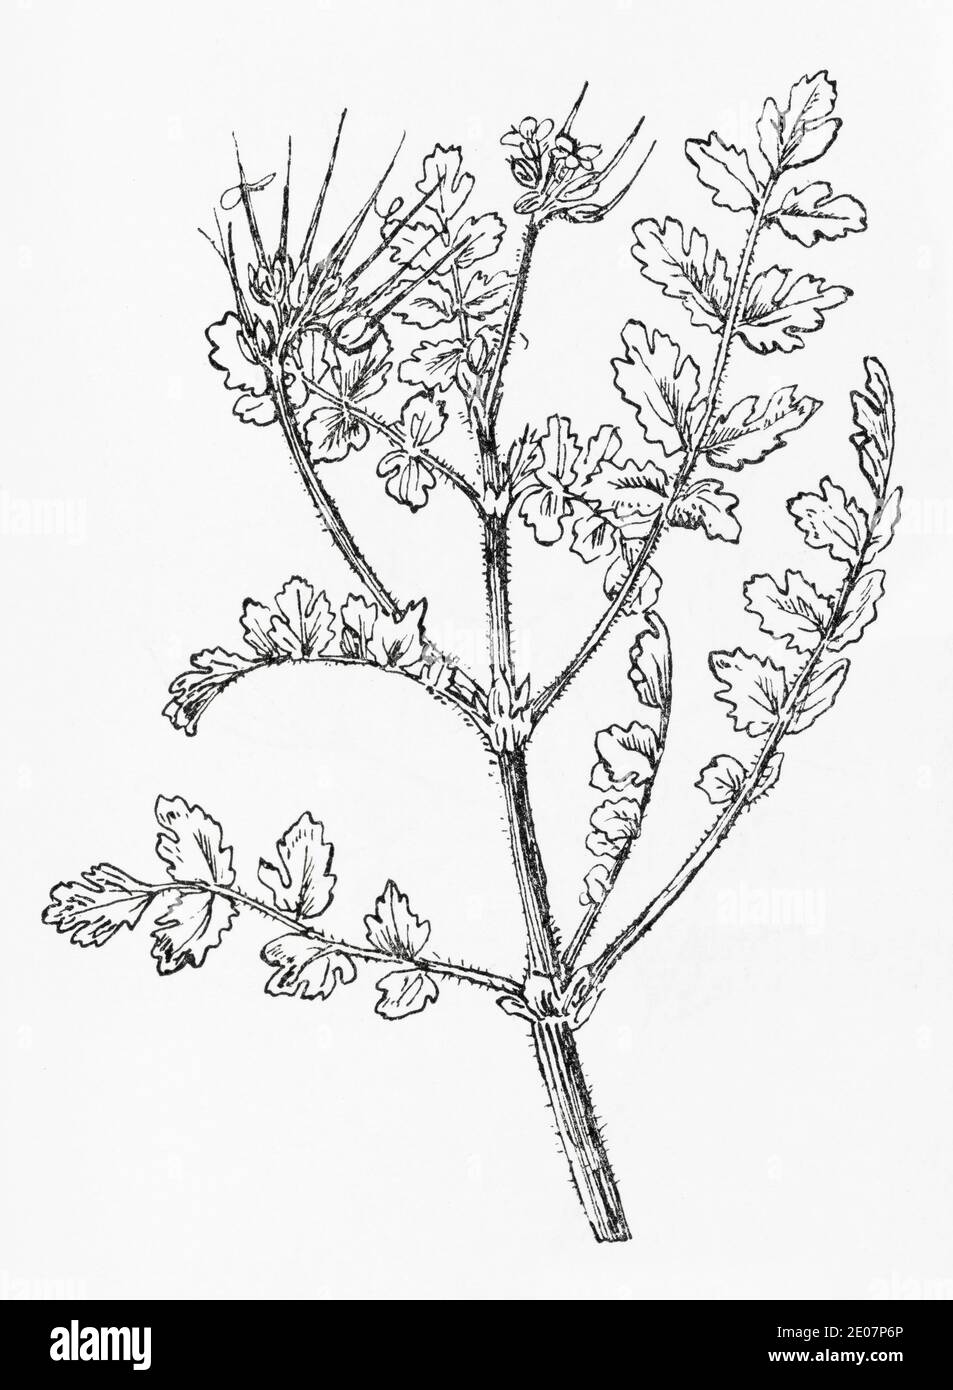 Old botanical illustration engraving of Musk Storksbill / Erodium moschatum. Traditional medicinal herbal plant in parts of world. See Notes Stock Photo